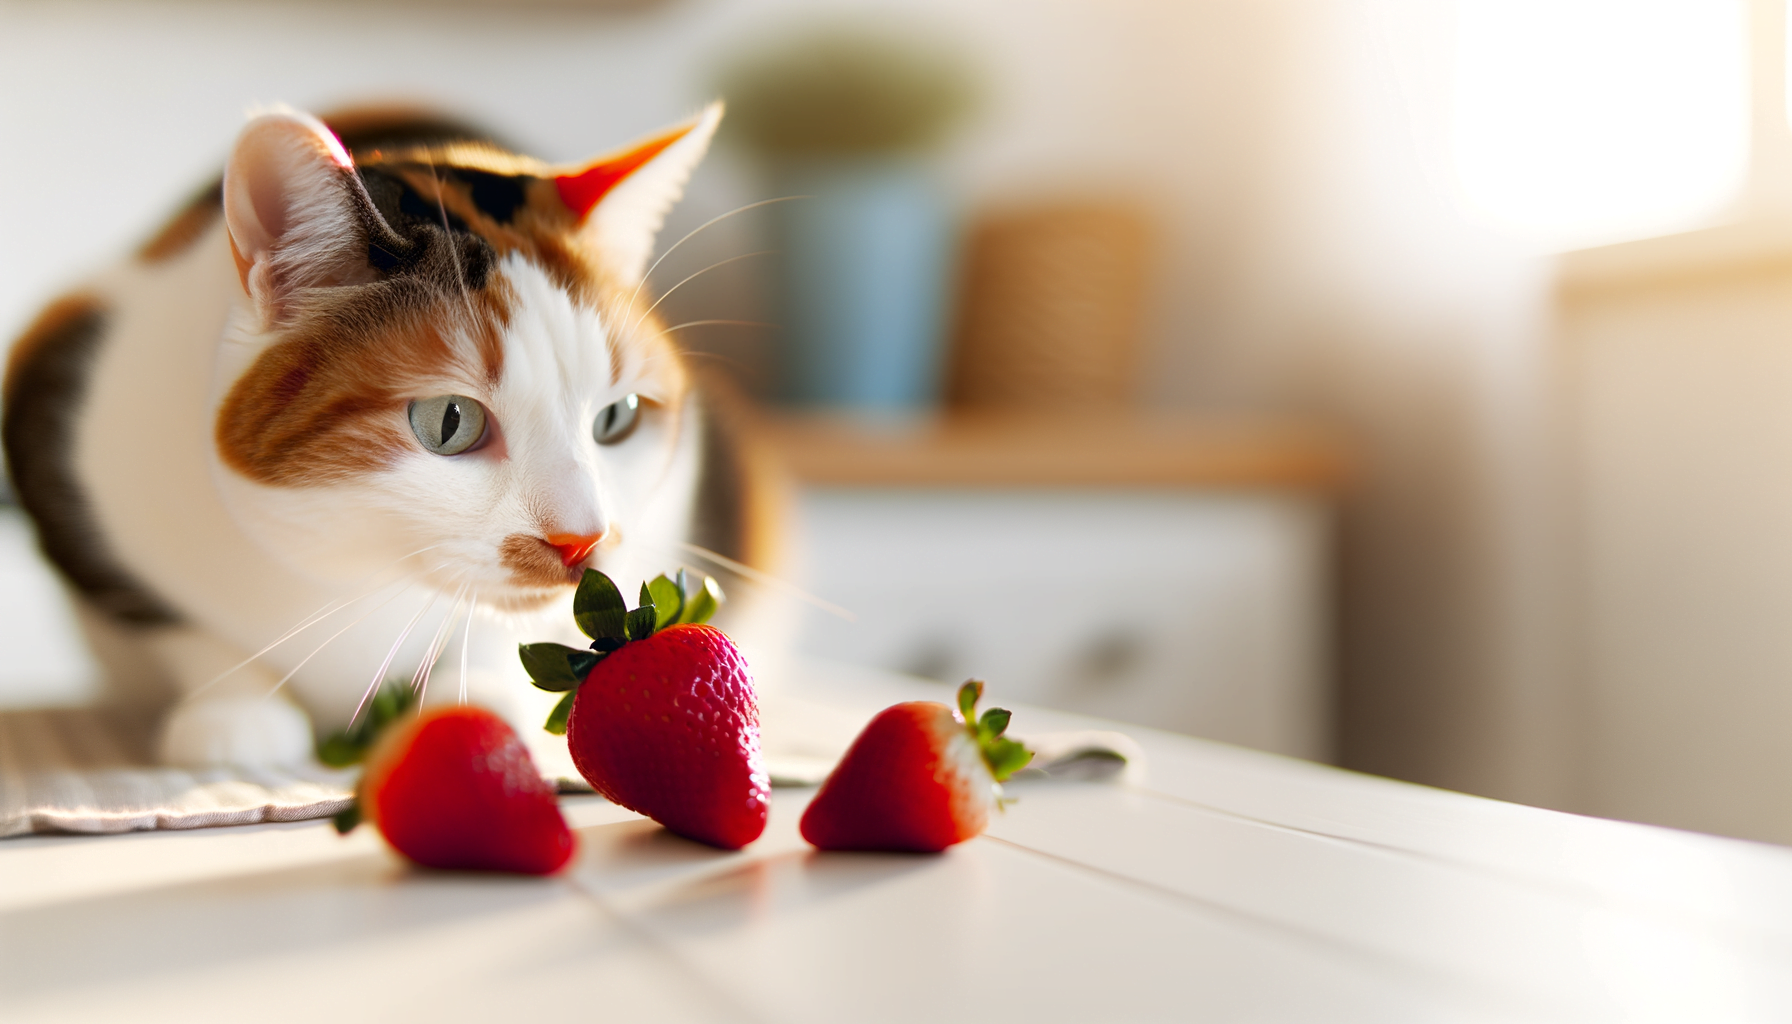 "Decoding a Cat's Diet: The Truth about Cats and Strawberries"